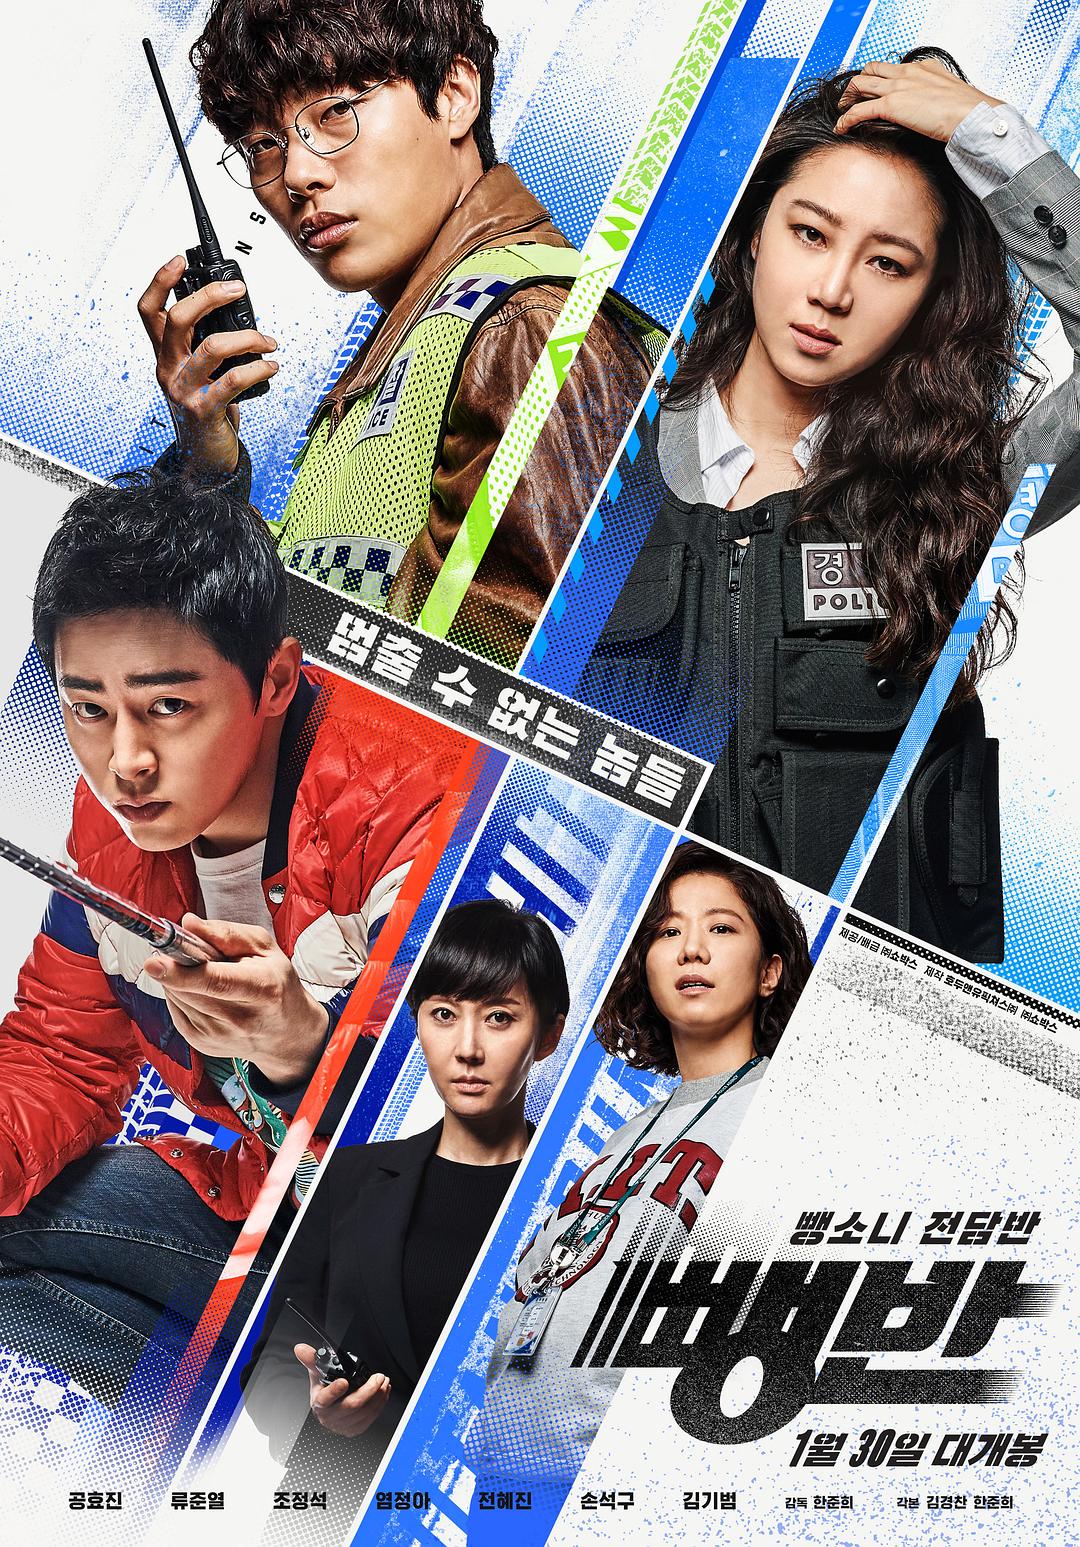  Hit-and-Run.Squad.2019.KOREAN.1080p.BluRay.REMUX.AVC.DTS-HD.MA.5.1-FGT 34.18G-1.png